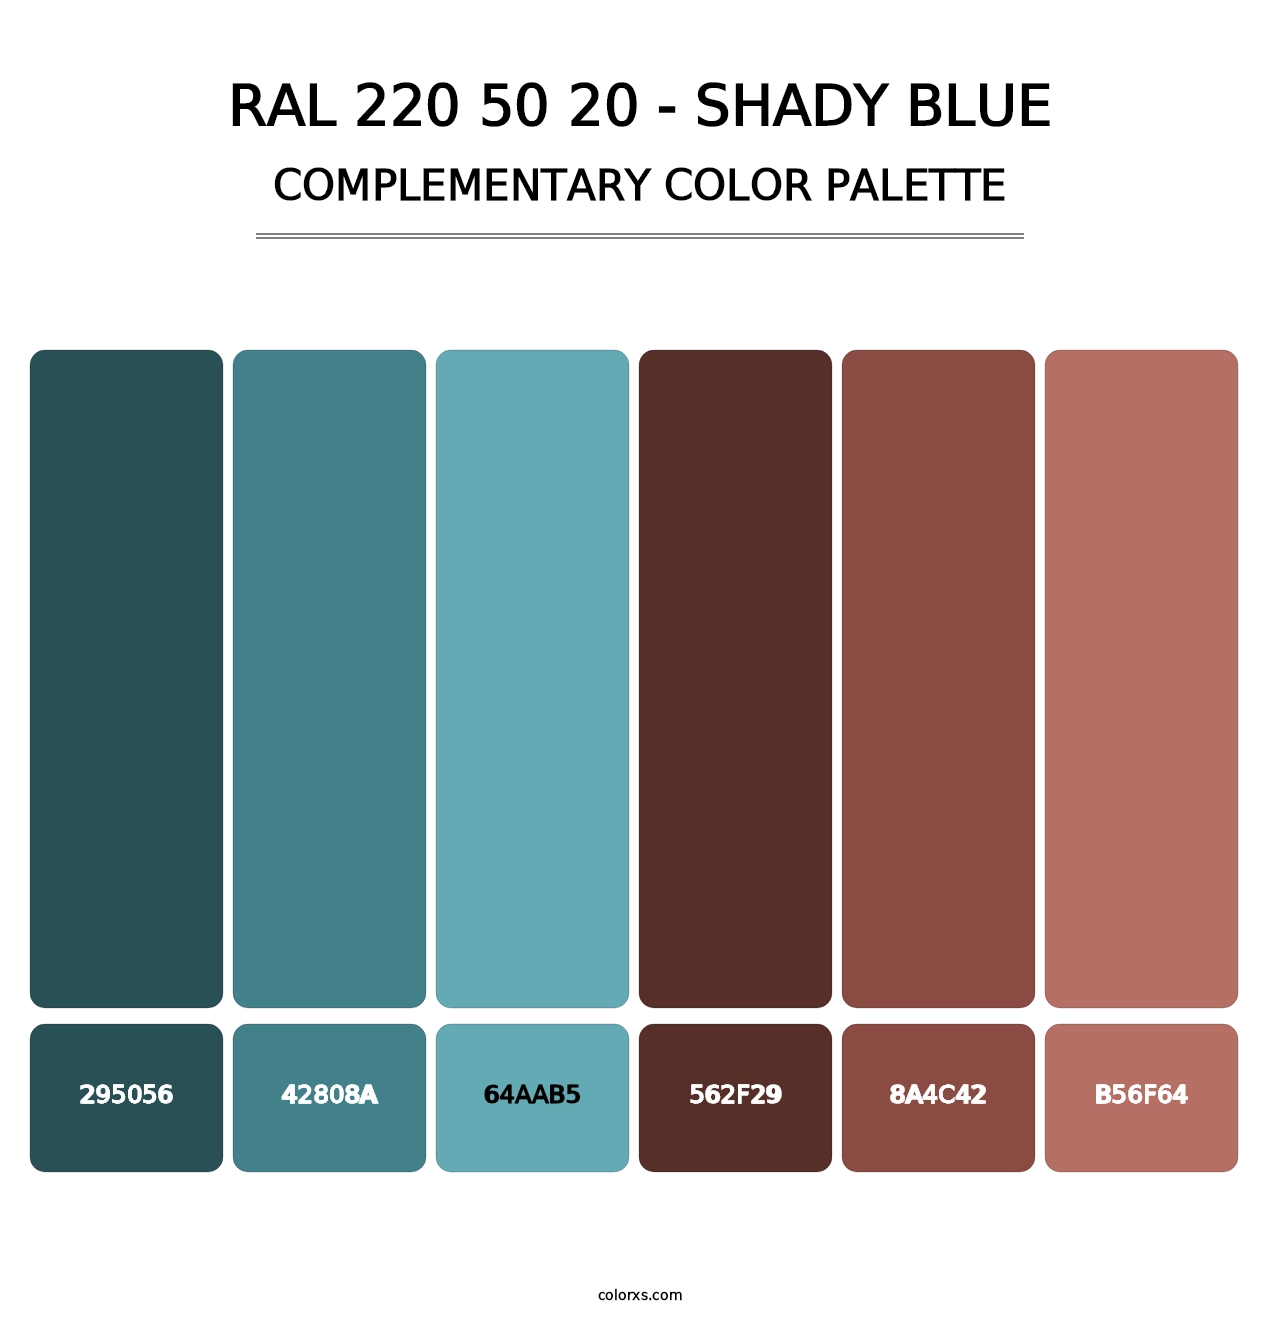 RAL 220 50 20 - Shady Blue - Complementary Color Palette